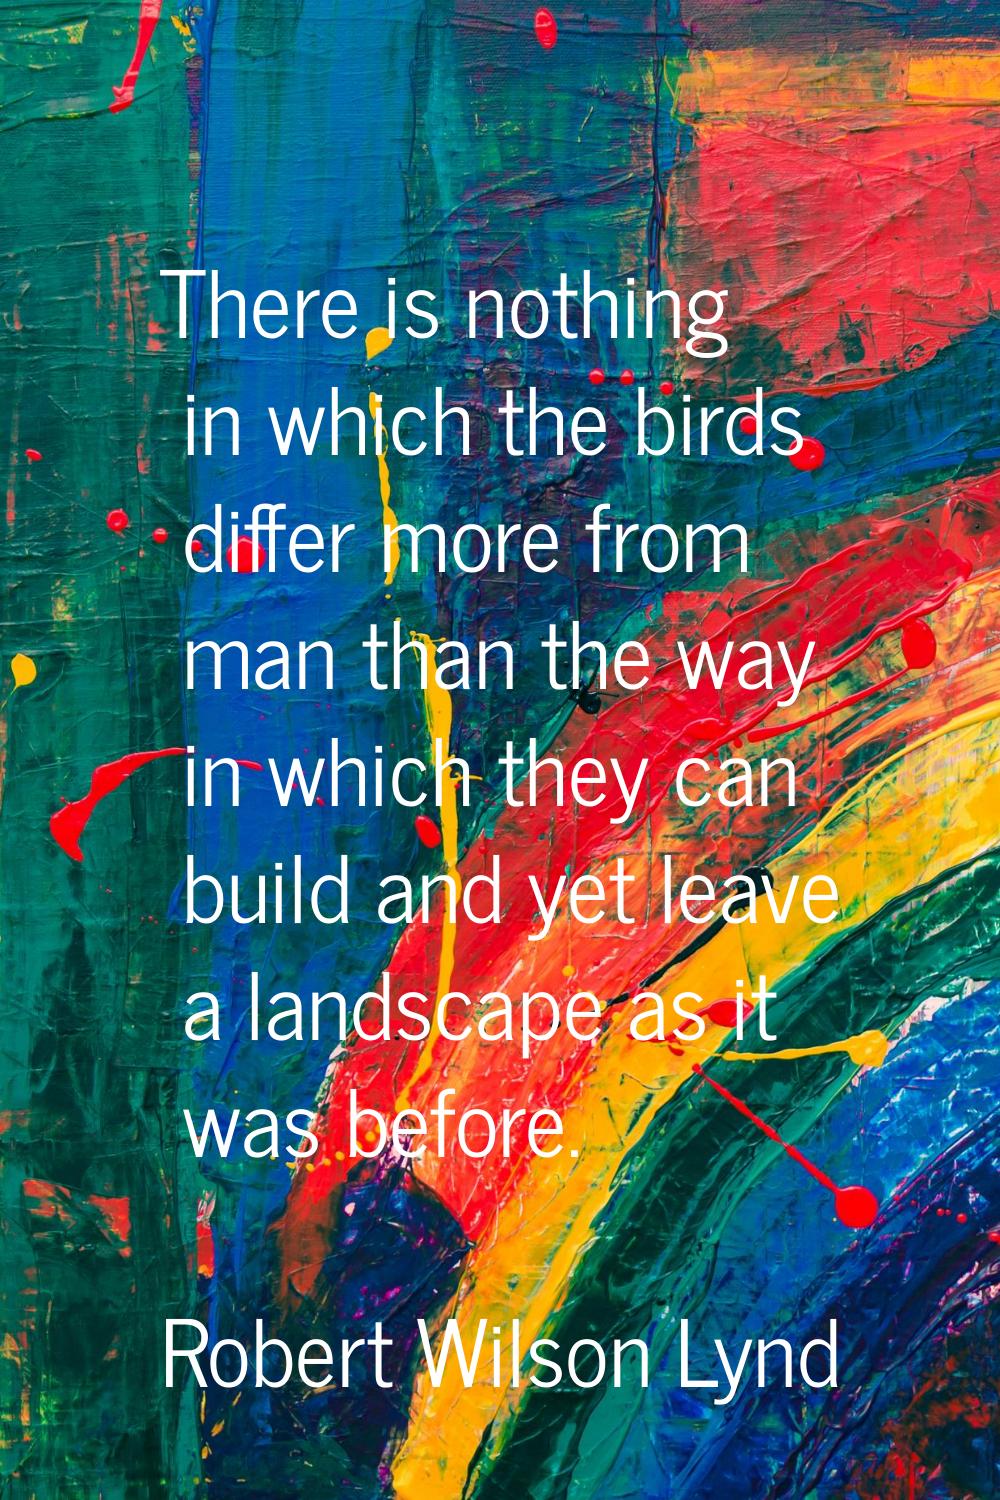 There is nothing in which the birds differ more from man than the way in which they can build and y